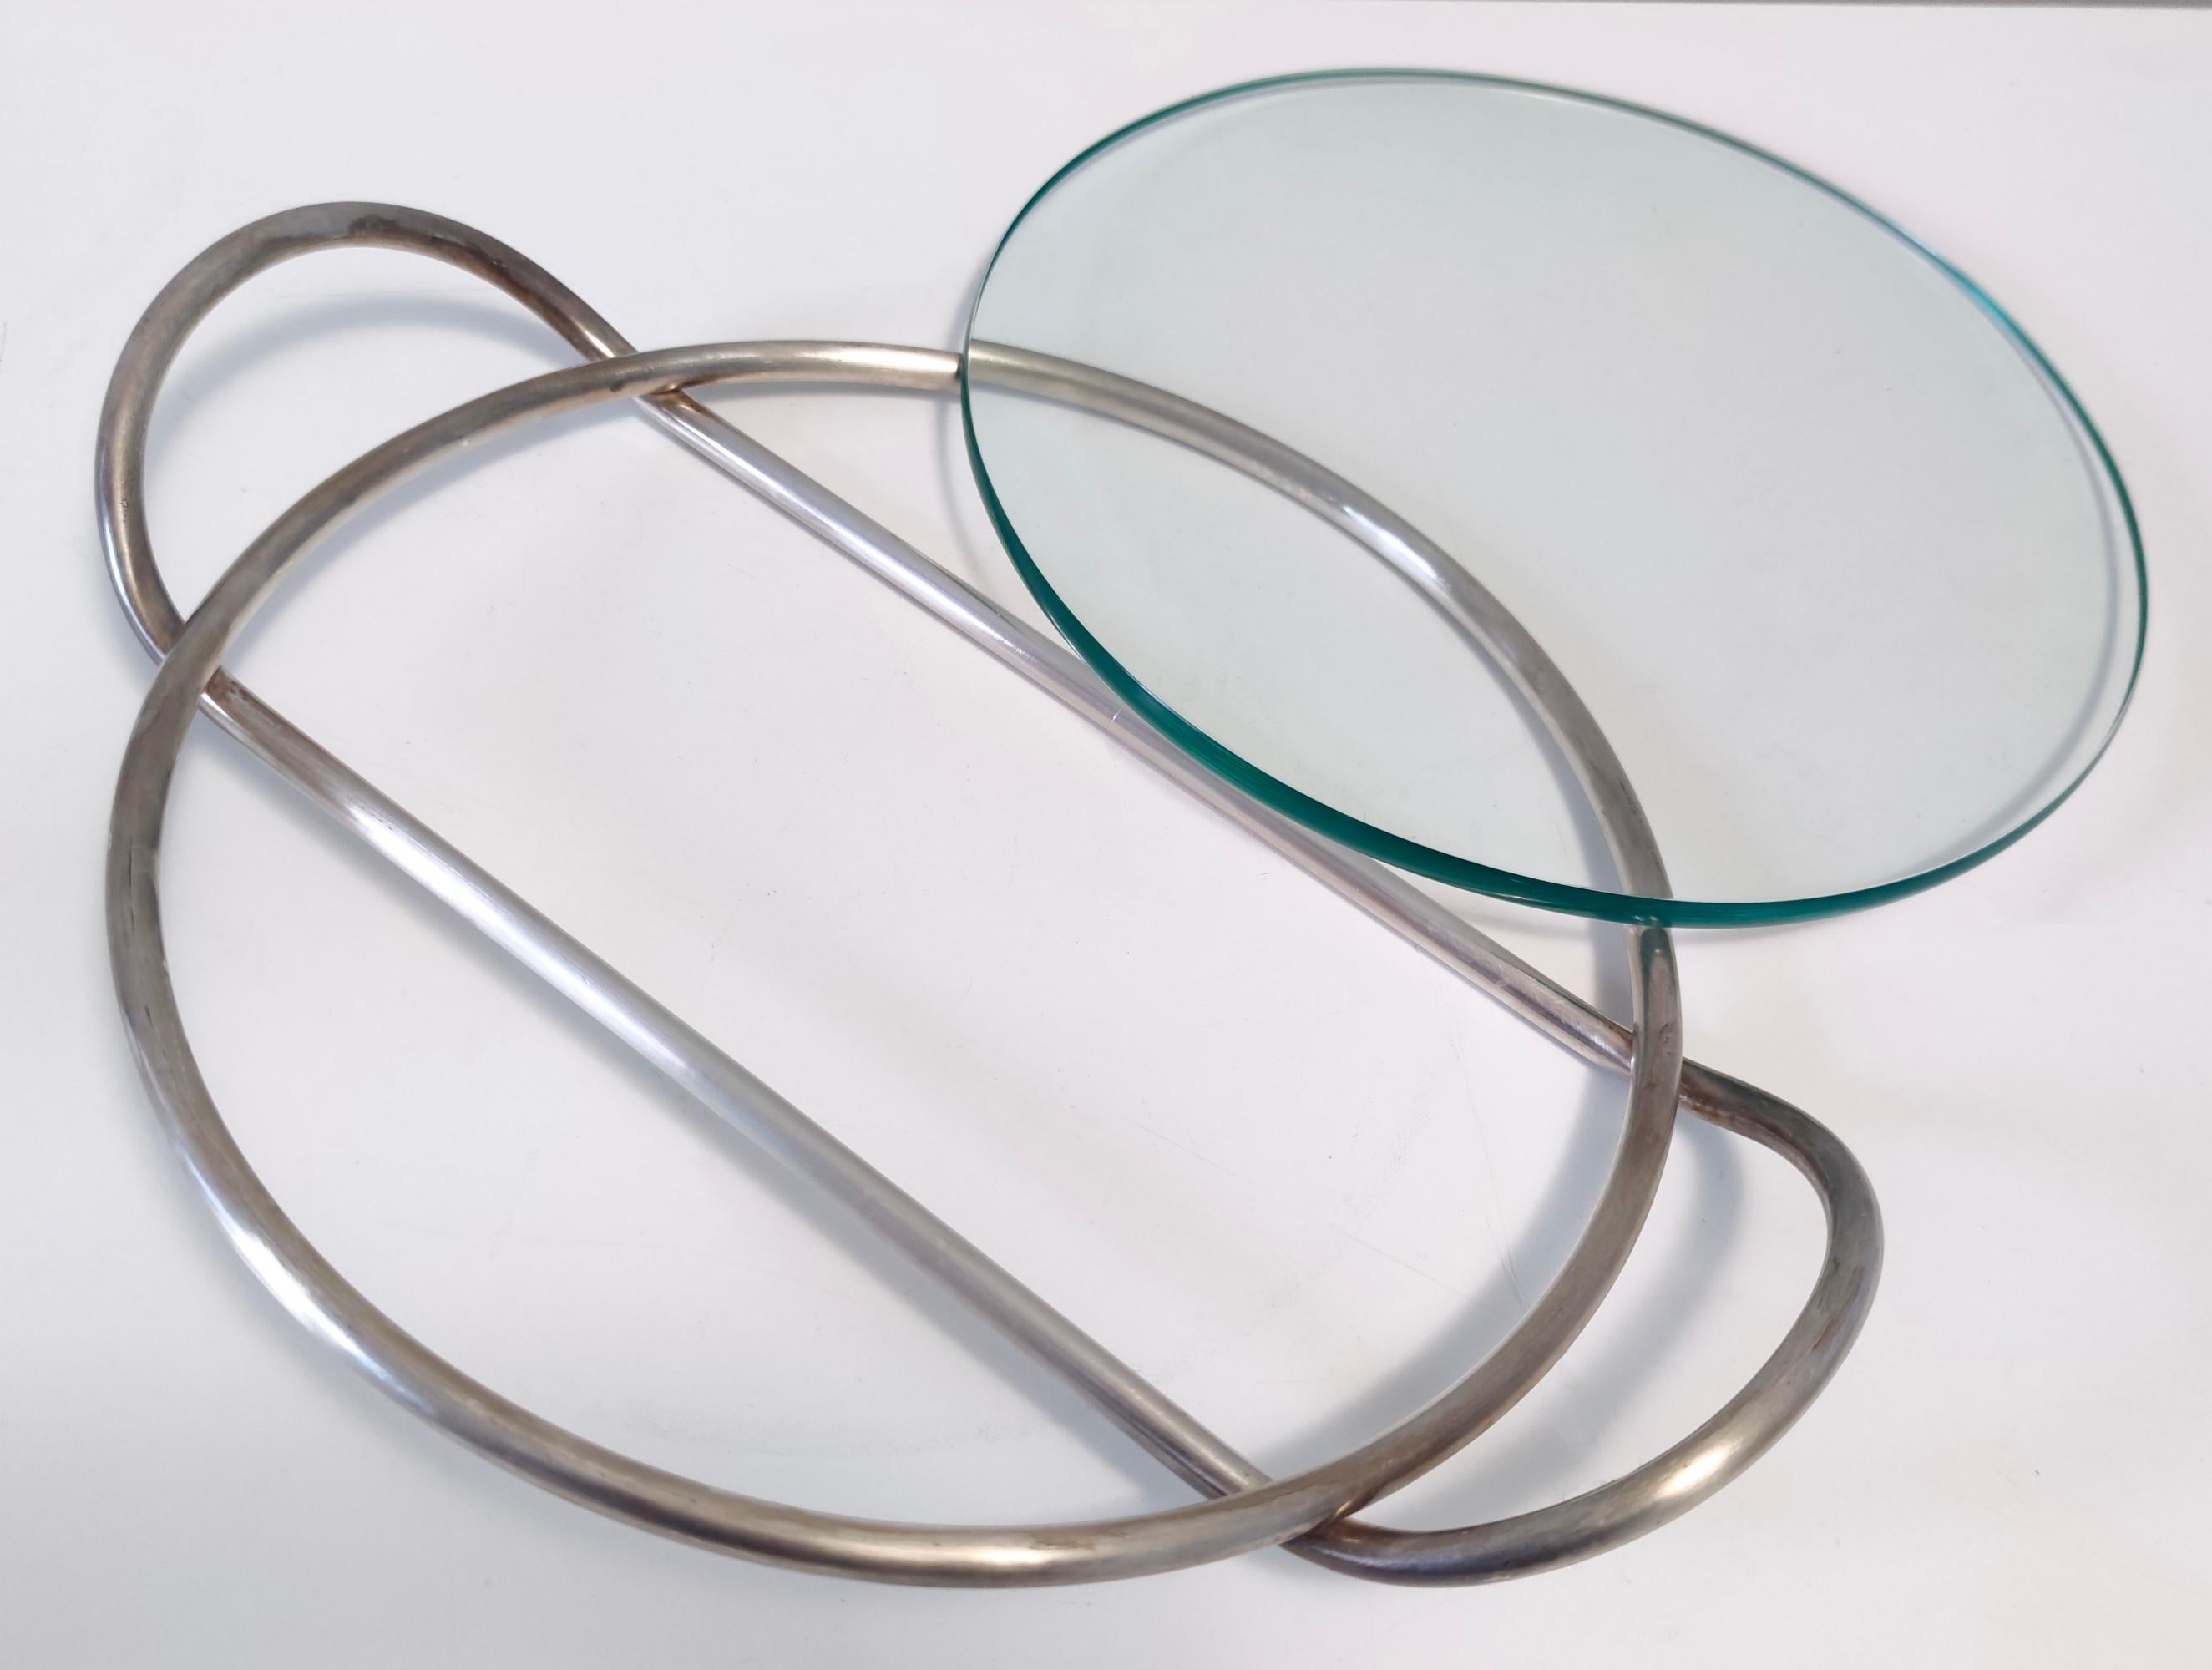 Post-Modern Postmodern Lino Sabattini Silver-Plated and Glass Serving Plate or Trivet, Italy